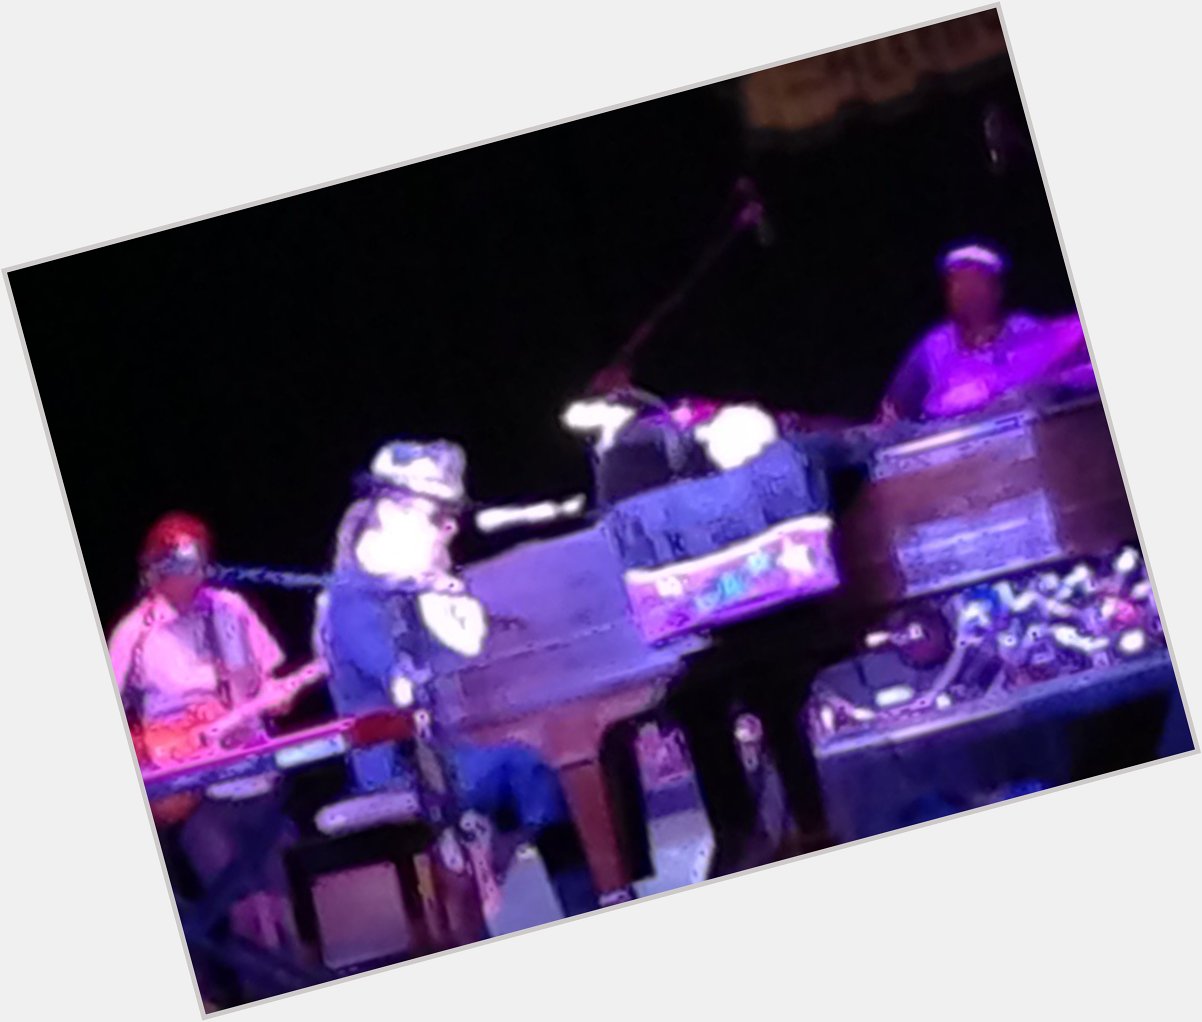 Yo happy birthday to Dr. John. The guy truly is a jazz legend and seeing him live was an incredible experience 